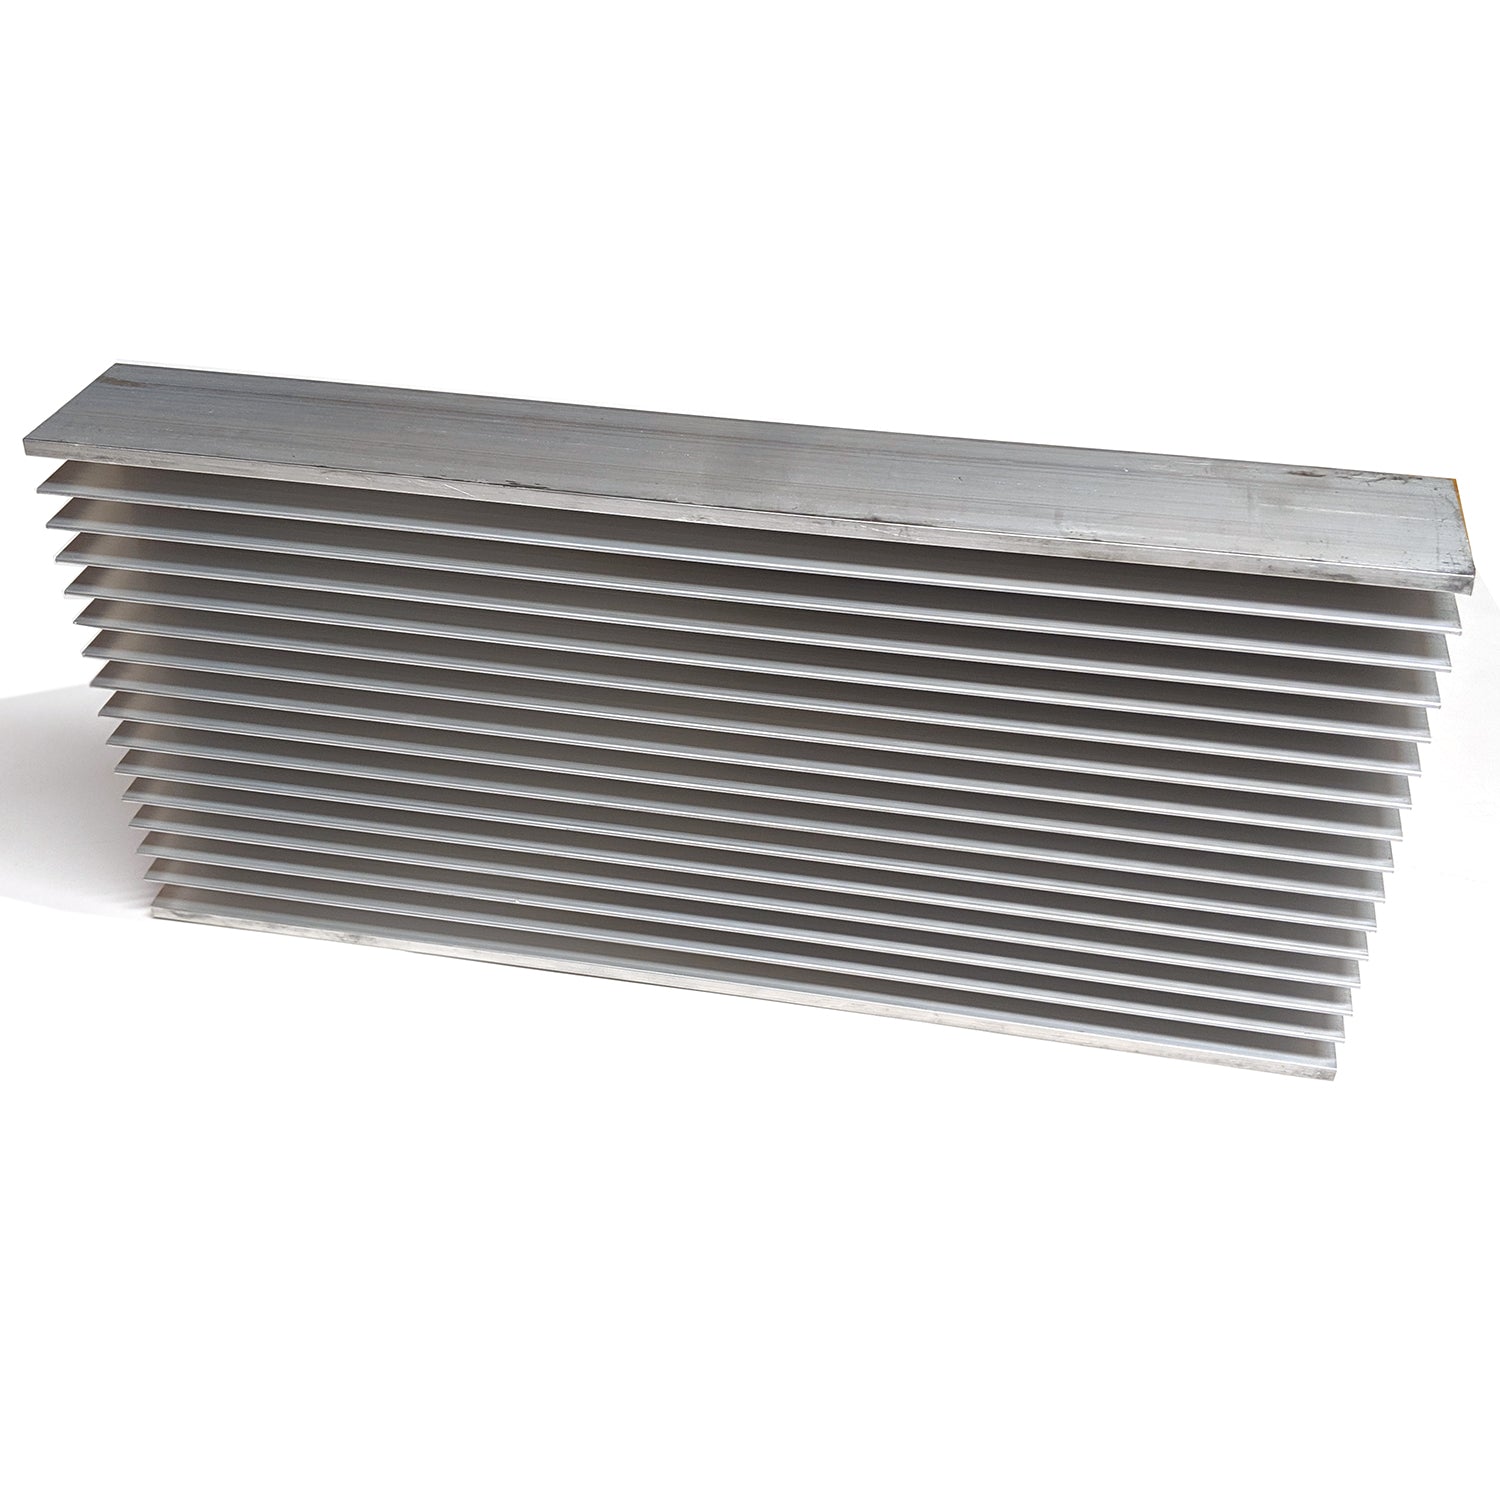 Tapped Large Heat sink